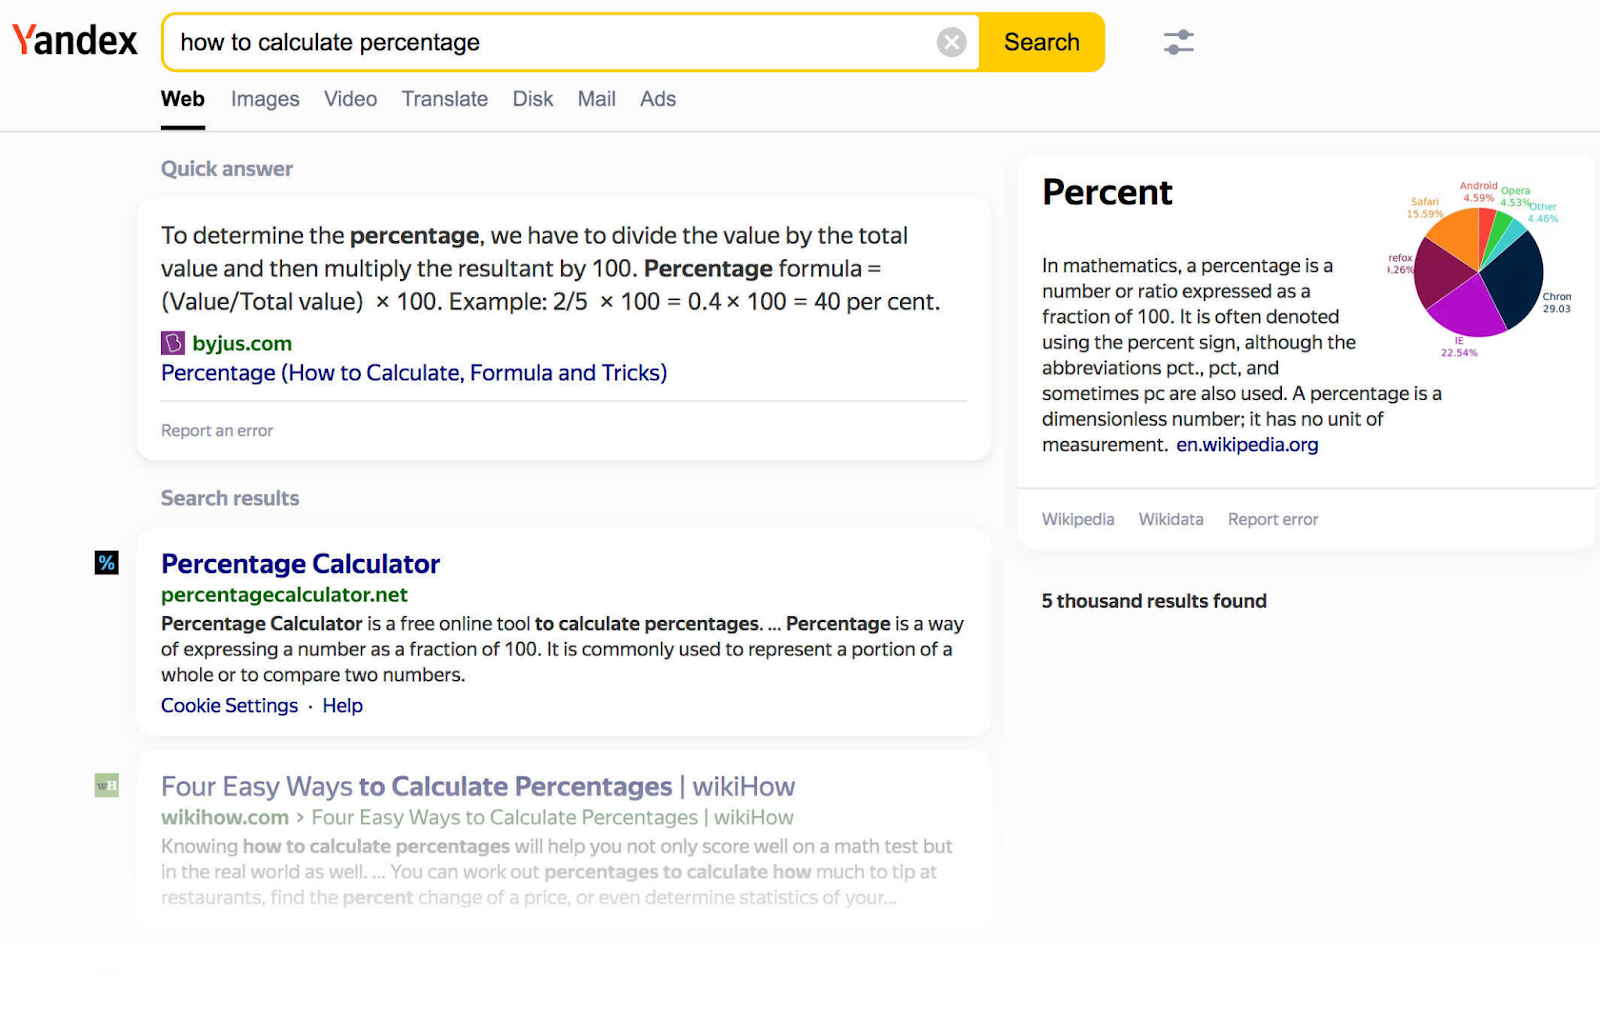 search results for "how to calculate percentage" in yandex.com